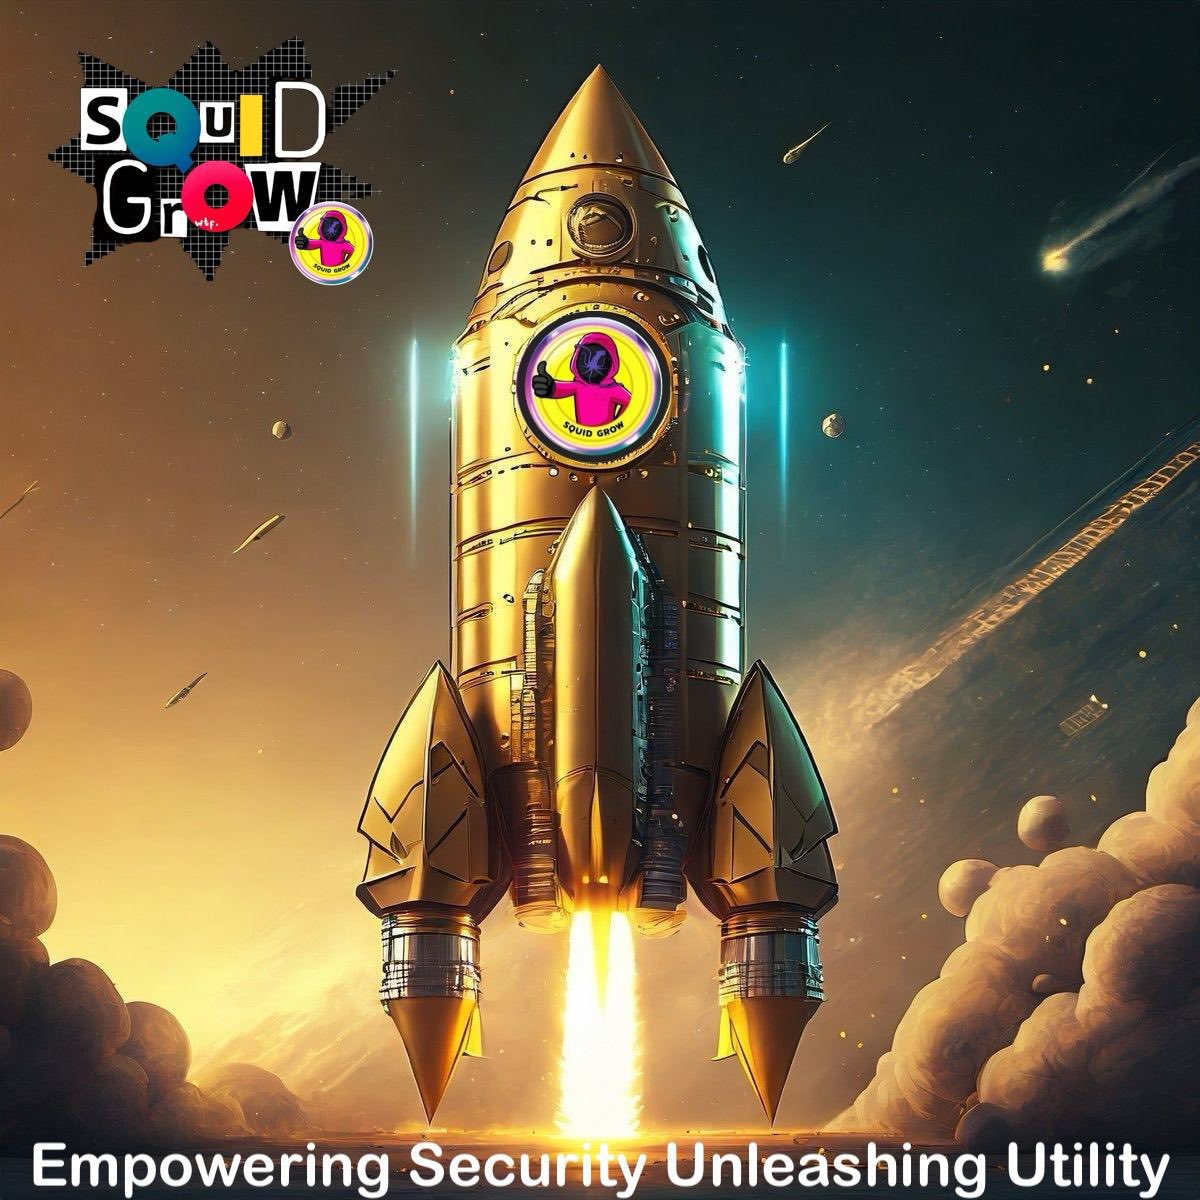 With an incredible team led by @Shibtoshi_SG, along with amazing projects and a thriving community, this is a recipe for success in the world of #crypto💥 This is one to watch, an investment now could be a game-changer! 🚀 @Squid_Grow